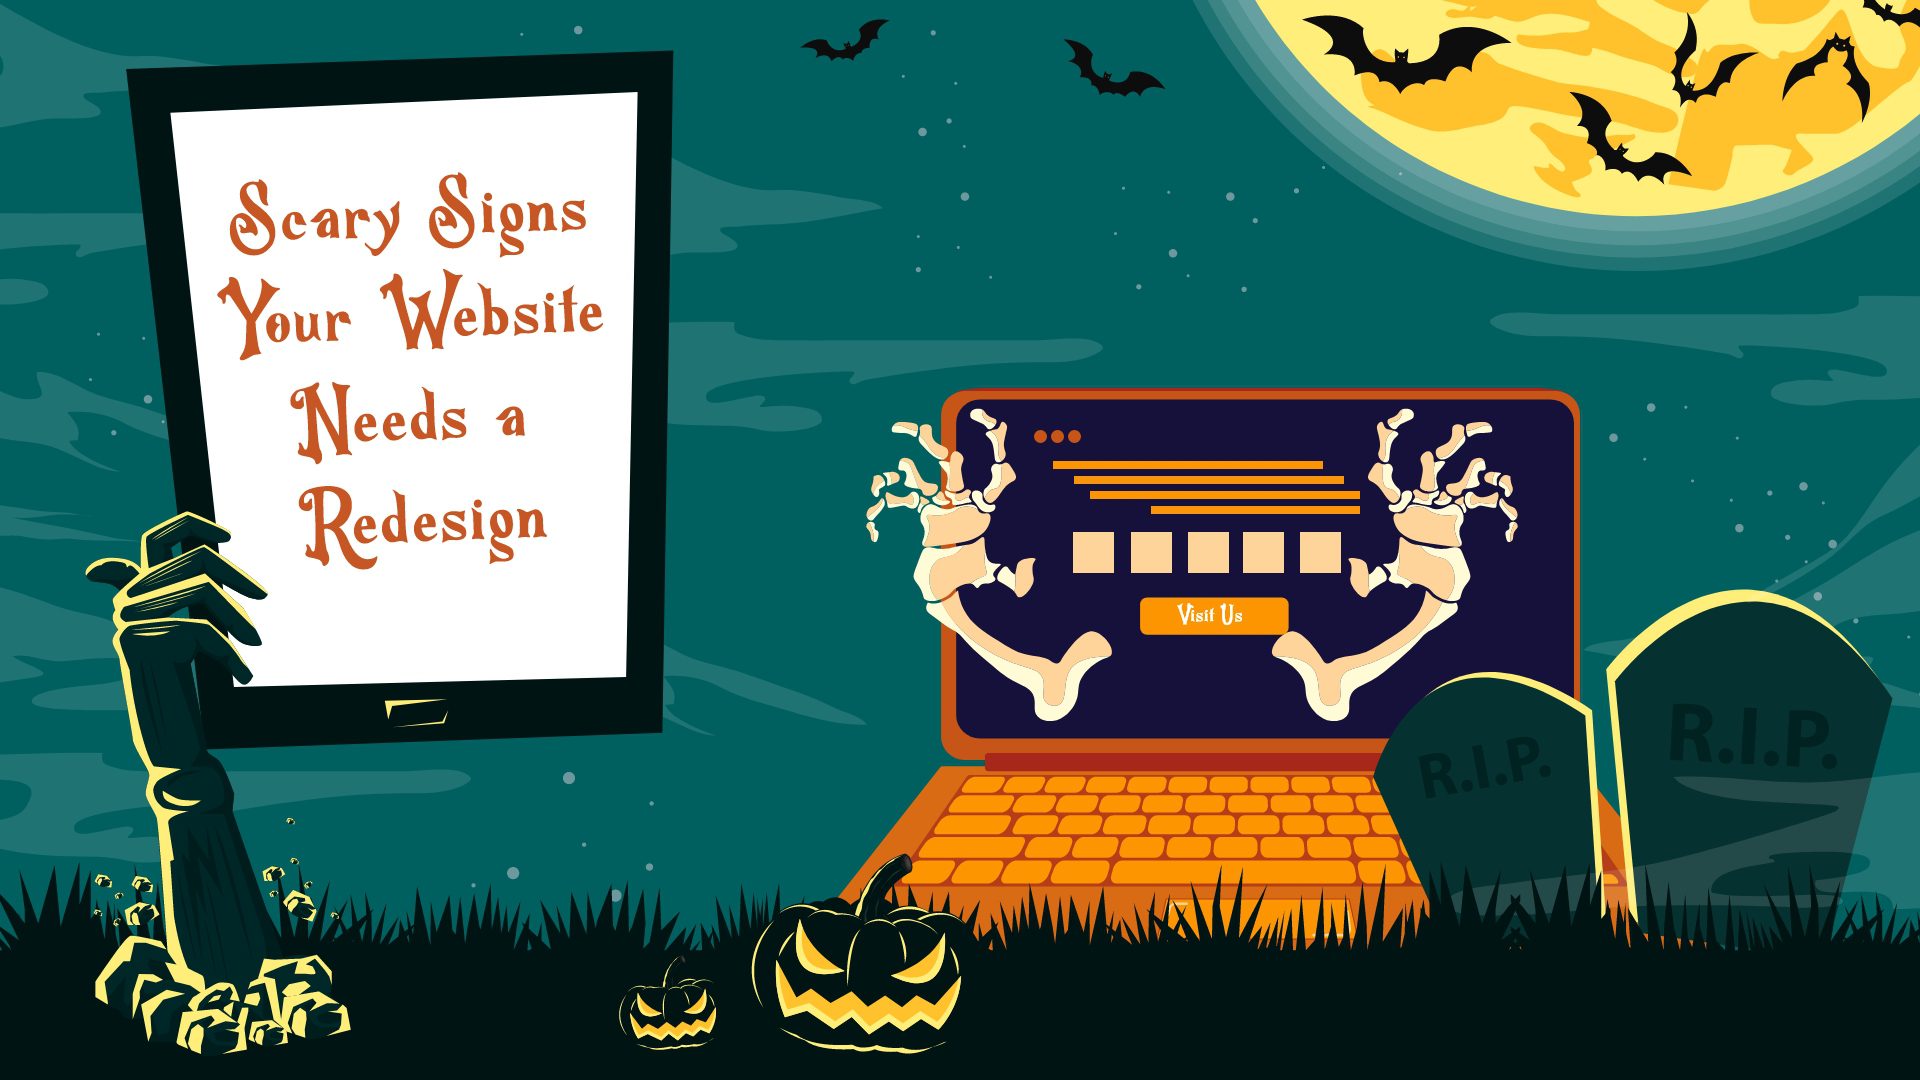 Scary Signs Your Website Needs a Redesign 